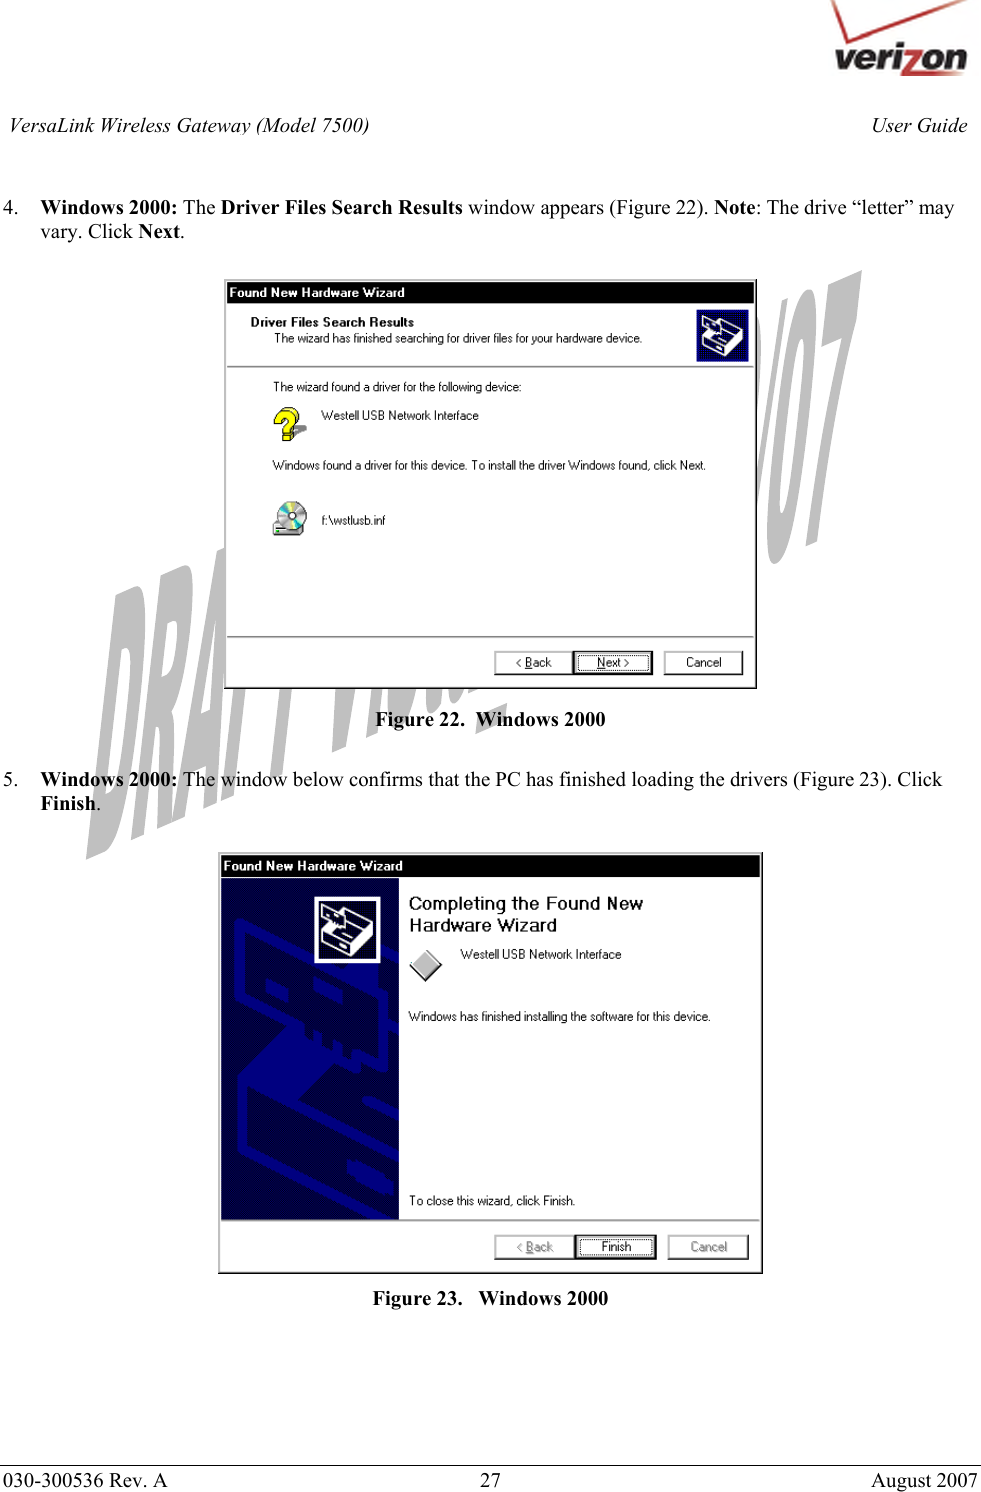       030-300536 Rev. A  27       August 2007 User GuideVersaLink Wireless Gateway (Model 7500)  4. Windows 2000: The Driver Files Search Results window appears (Figure 22). Note: The drive “letter” may vary. Click Next.   Figure 22.  Windows 2000  5. Windows 2000: The window below confirms that the PC has finished loading the drivers (Figure 23). Click Finish.   Figure 23.   Windows 2000      